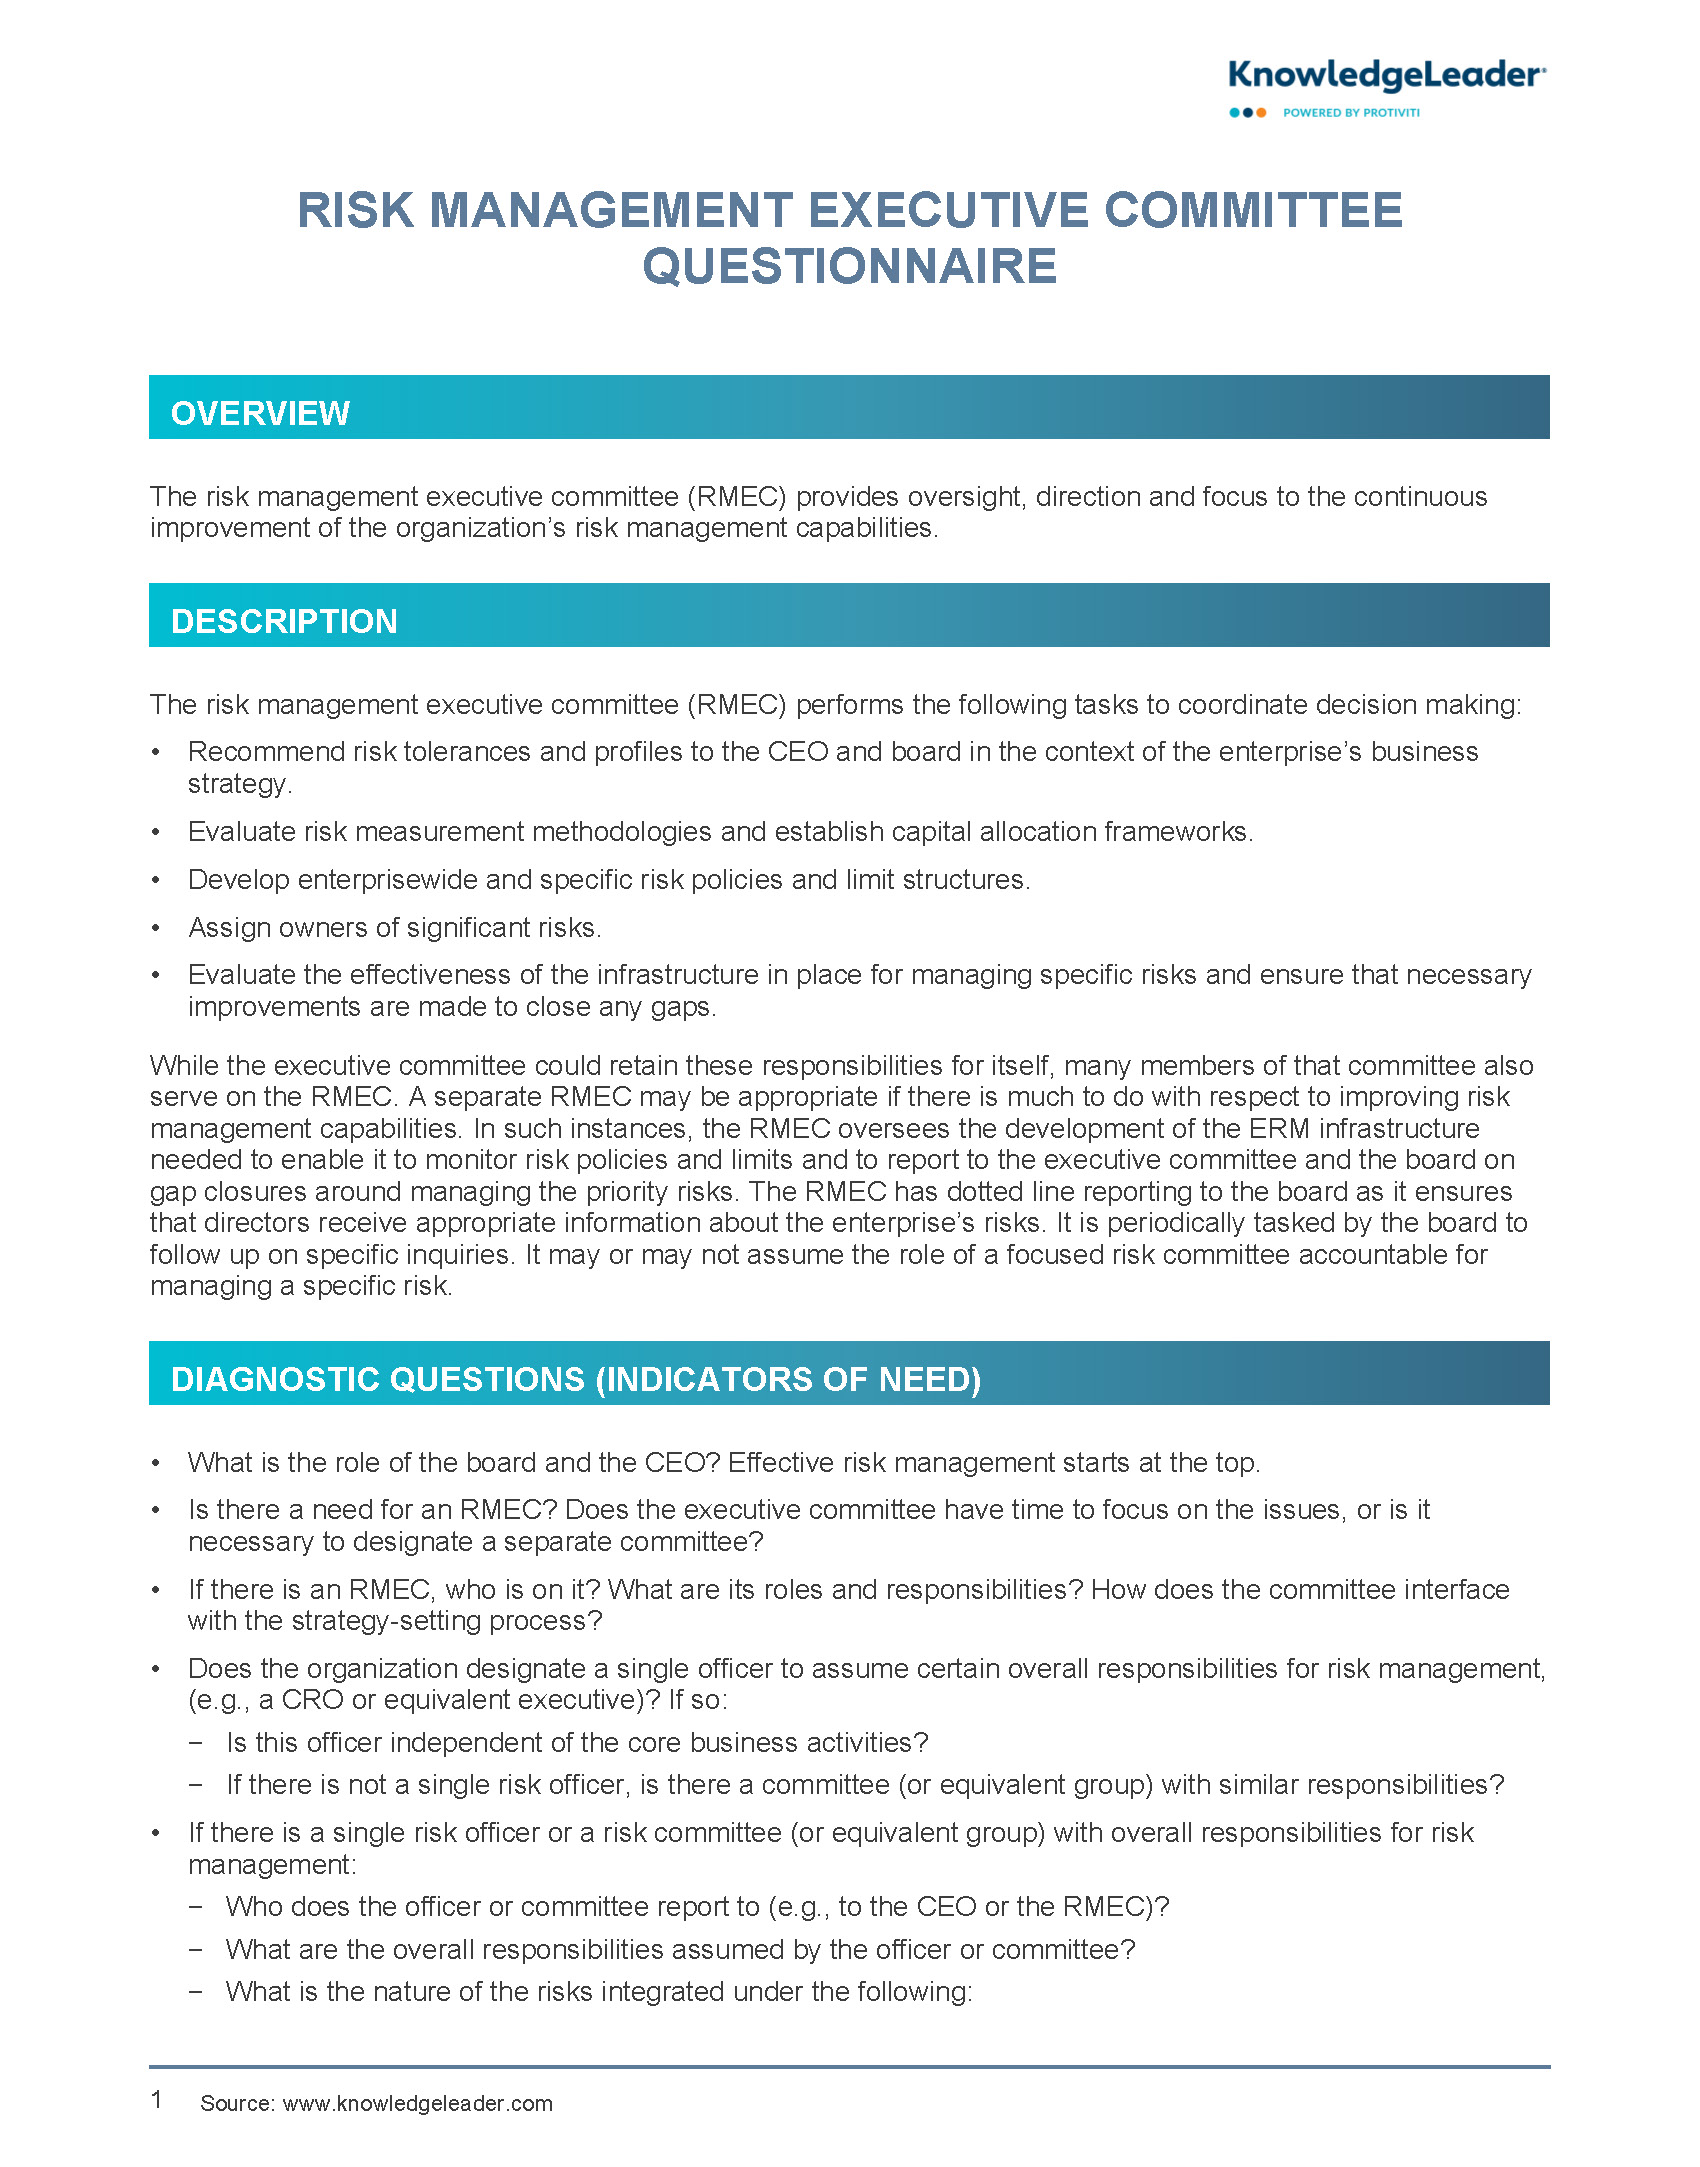 Screenshot of first page of Risk Management Executive Committee Questionnaire